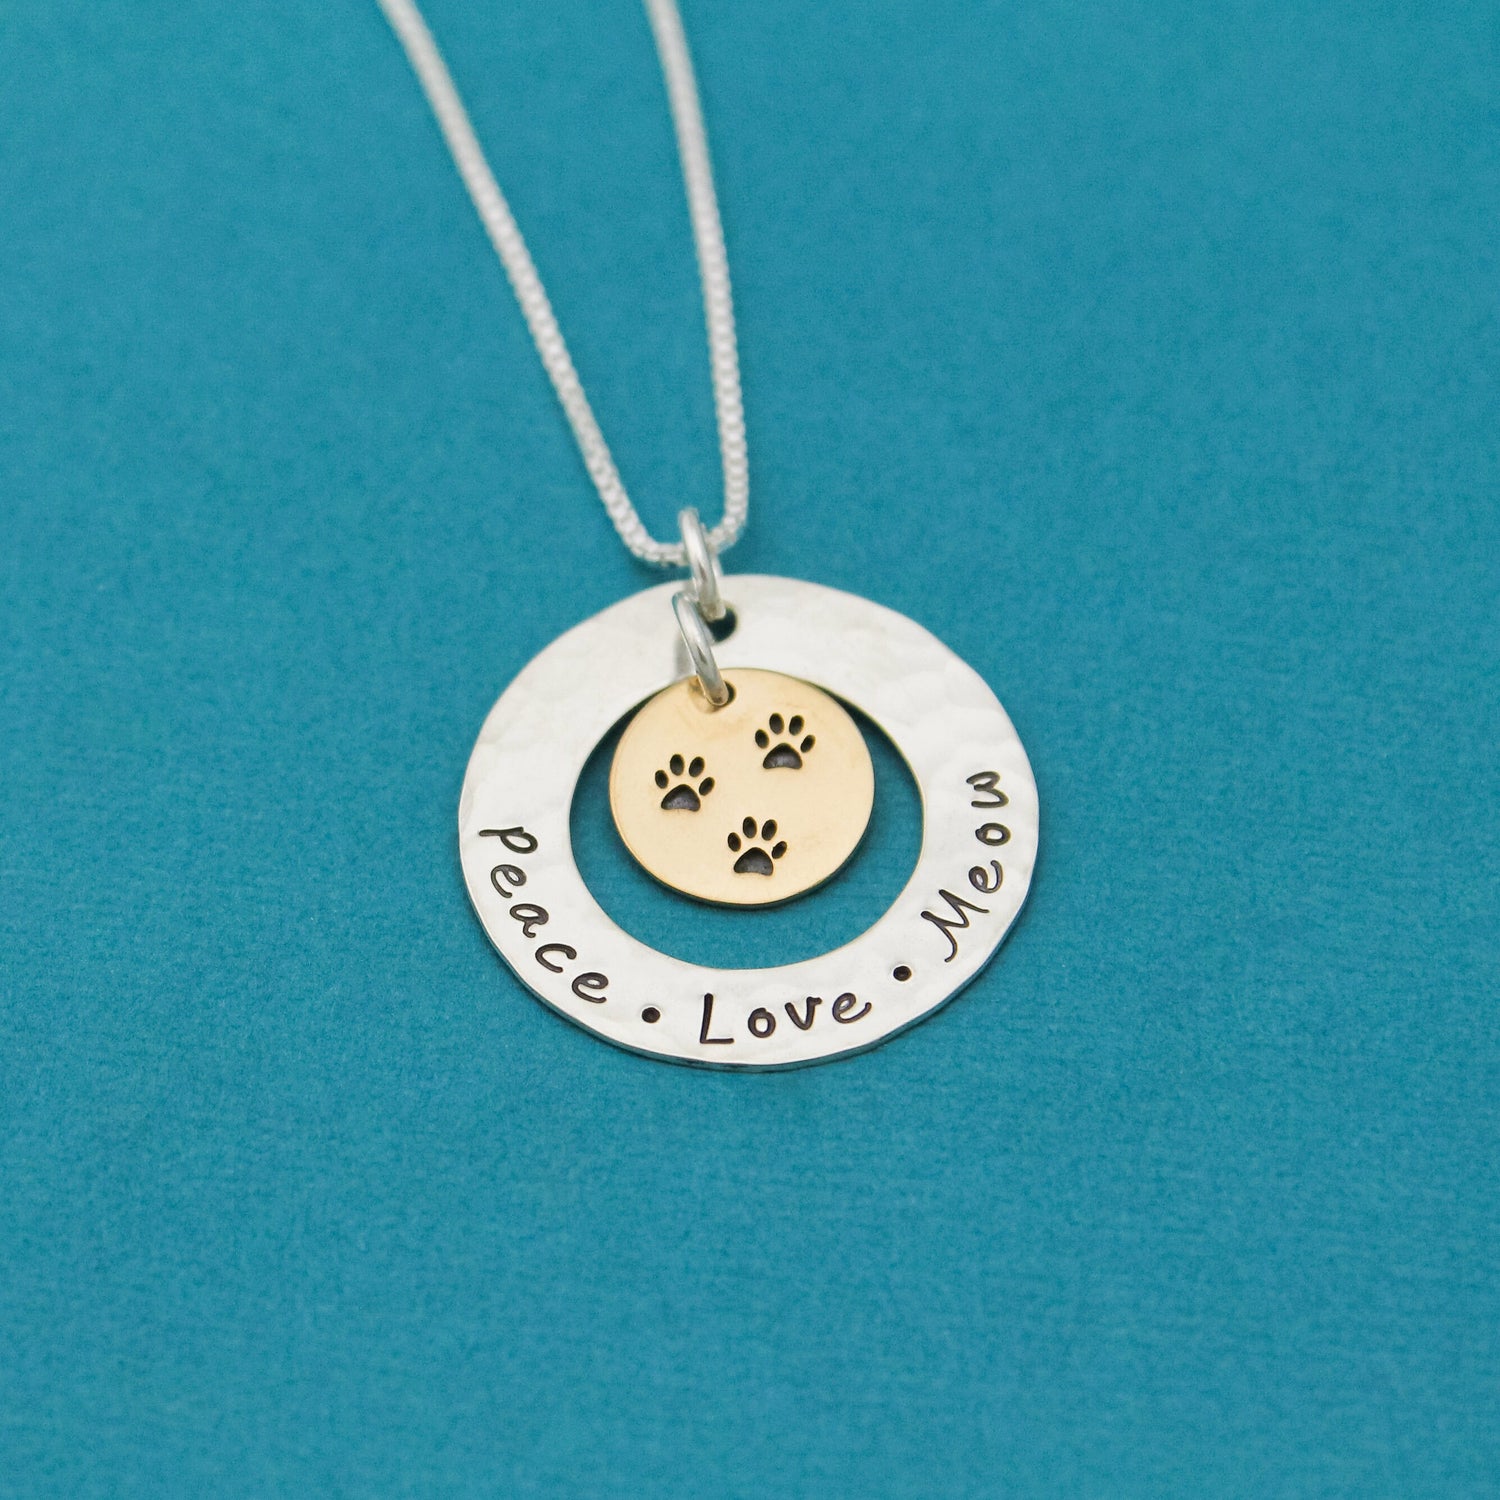 Peace Love Meow Necklace, Cat Lovers Necklace, Peace Love Meow Gift, Cat Jewelry, Paw Print Jewelry, Cat Lady Gift, Kitty Gift